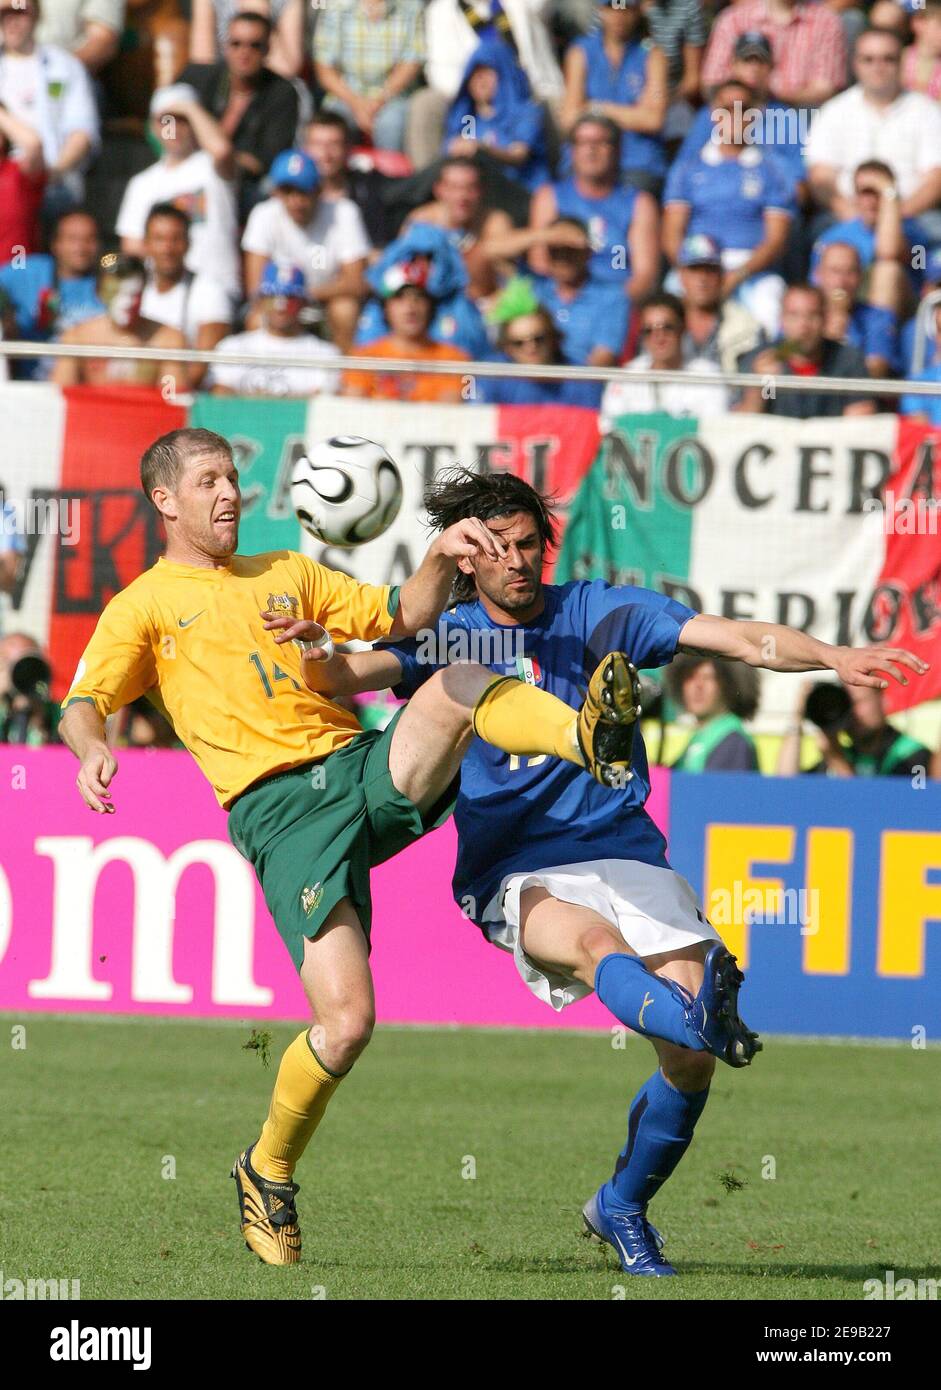 Australia's Scott Chipperfield and Italy's Alessandro Nesta battle for the  ball during the World Cup 2006, Second round, Australia vs Italy at the  Fritz-Walter-Stadion in Kaiserslautern, Germany on June 26, 2006. Italy